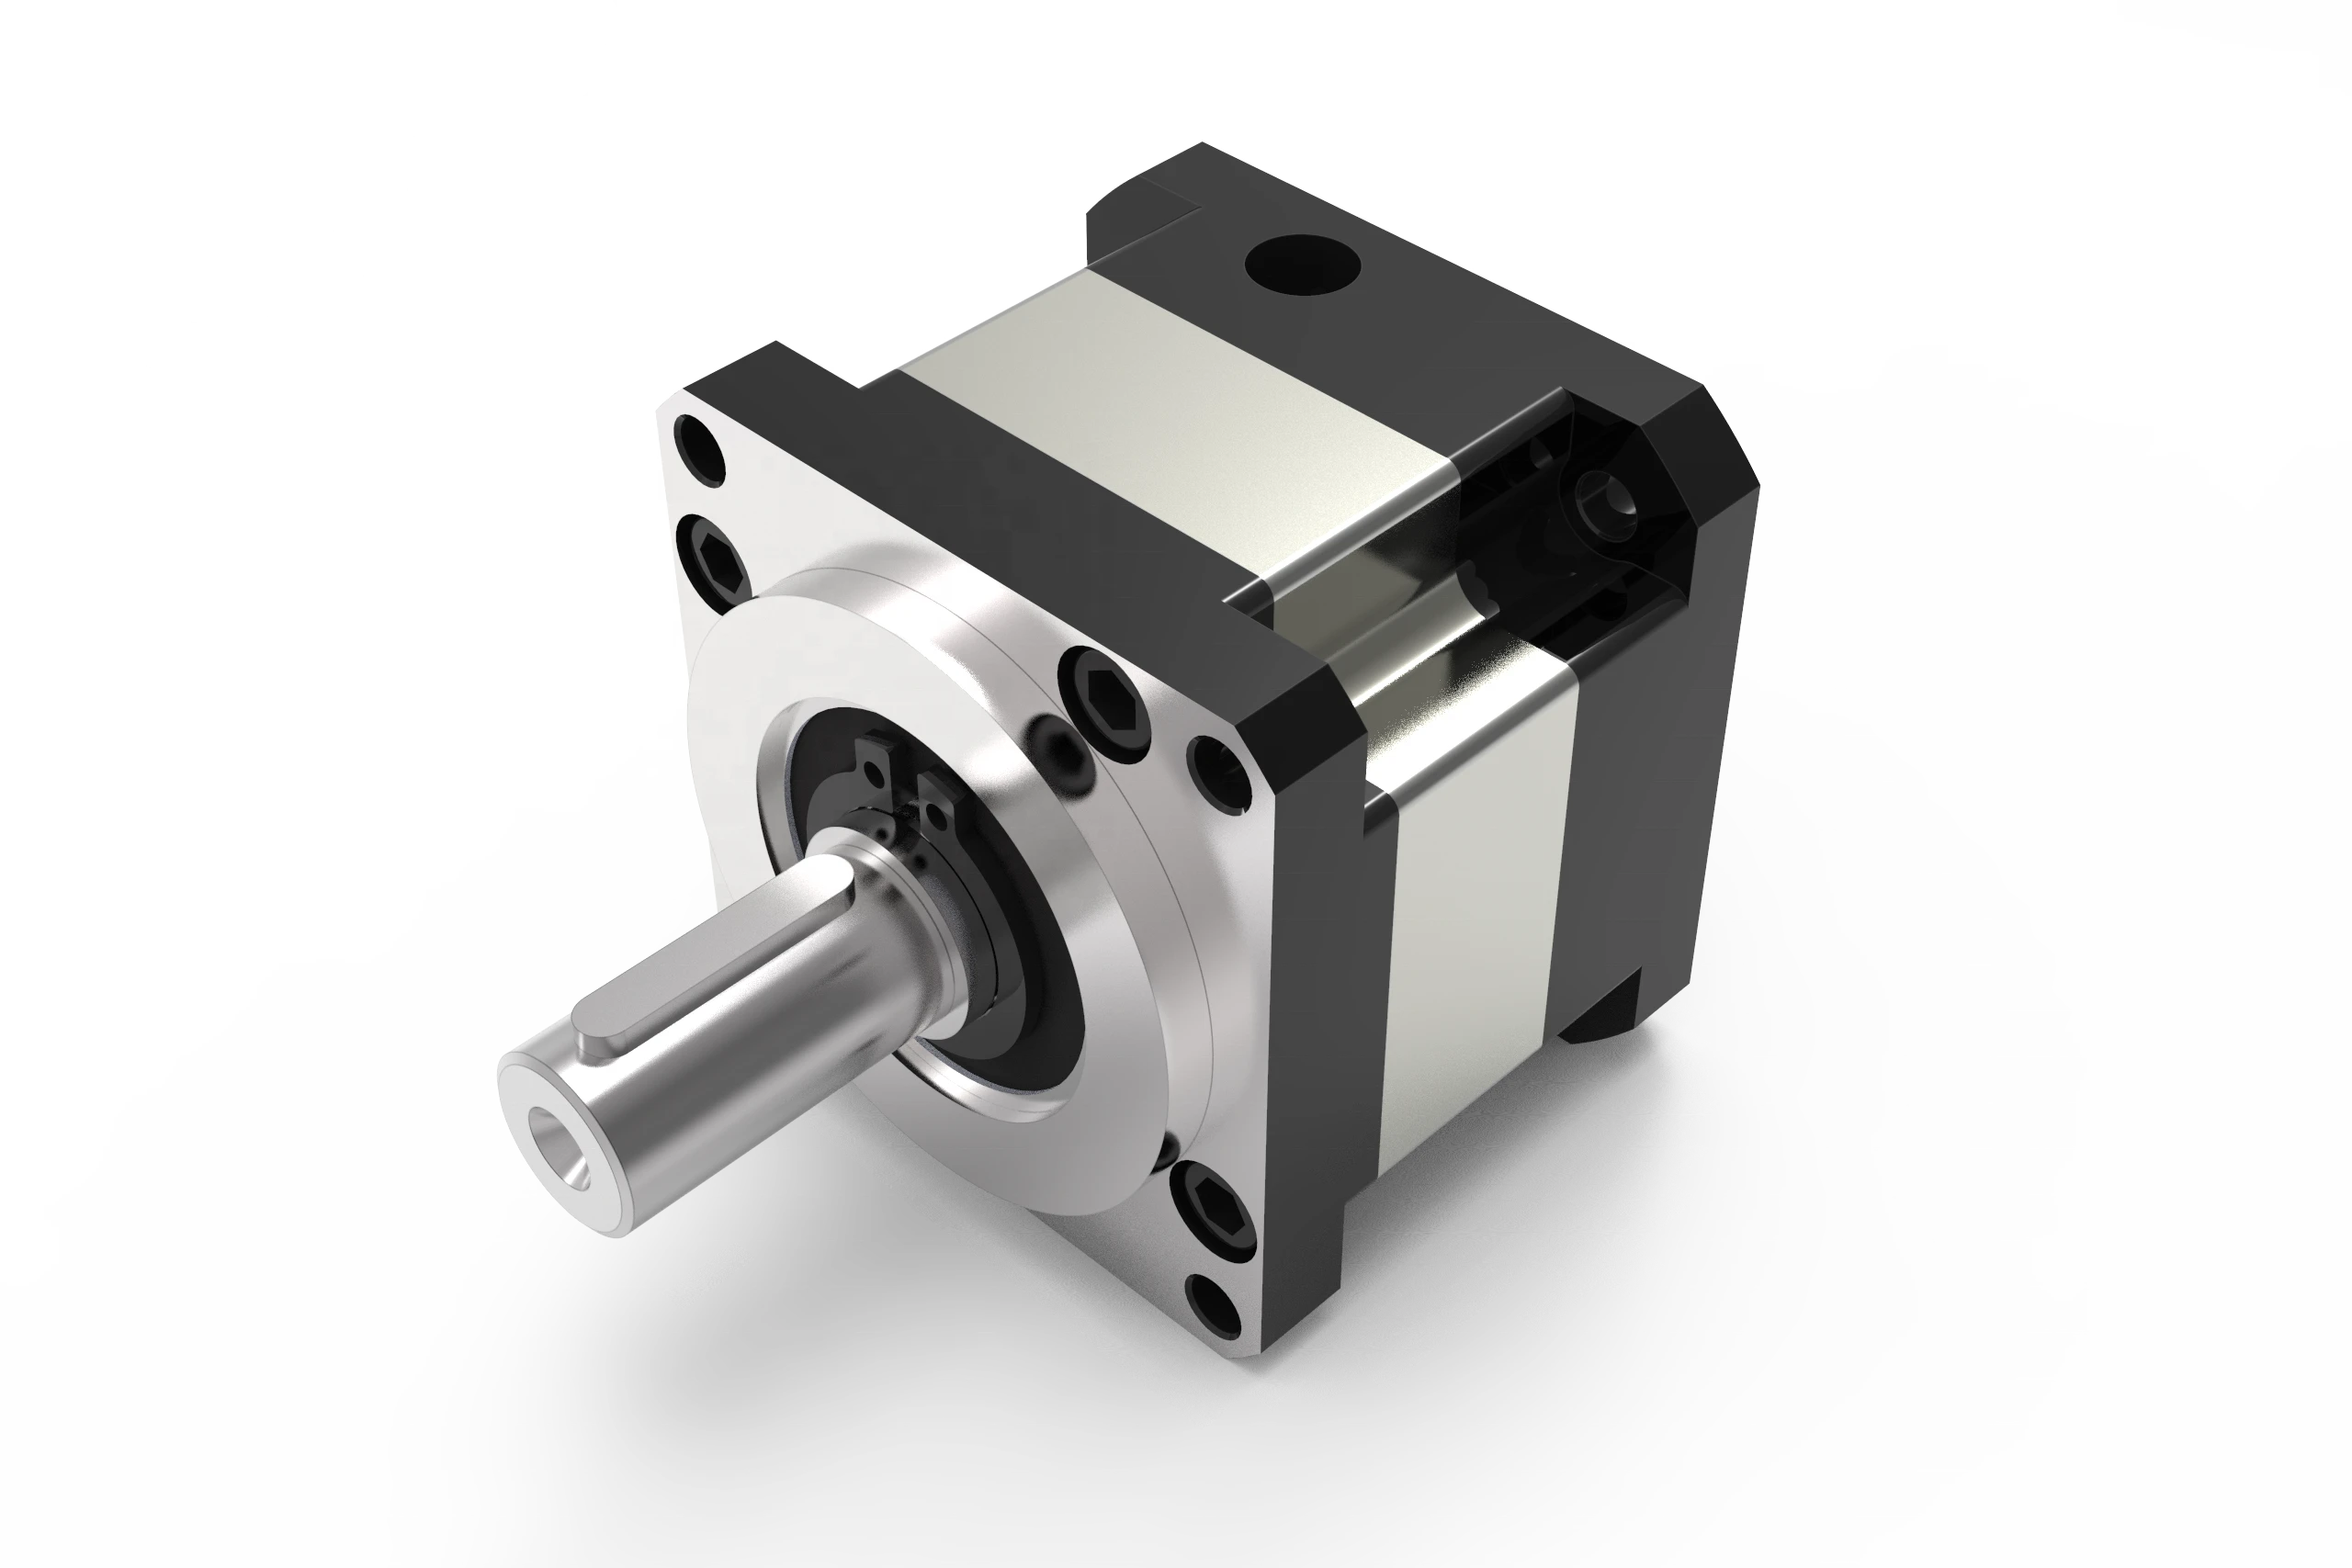 High Efficiency Transmission  Planetary Reducer Gearbox Motor